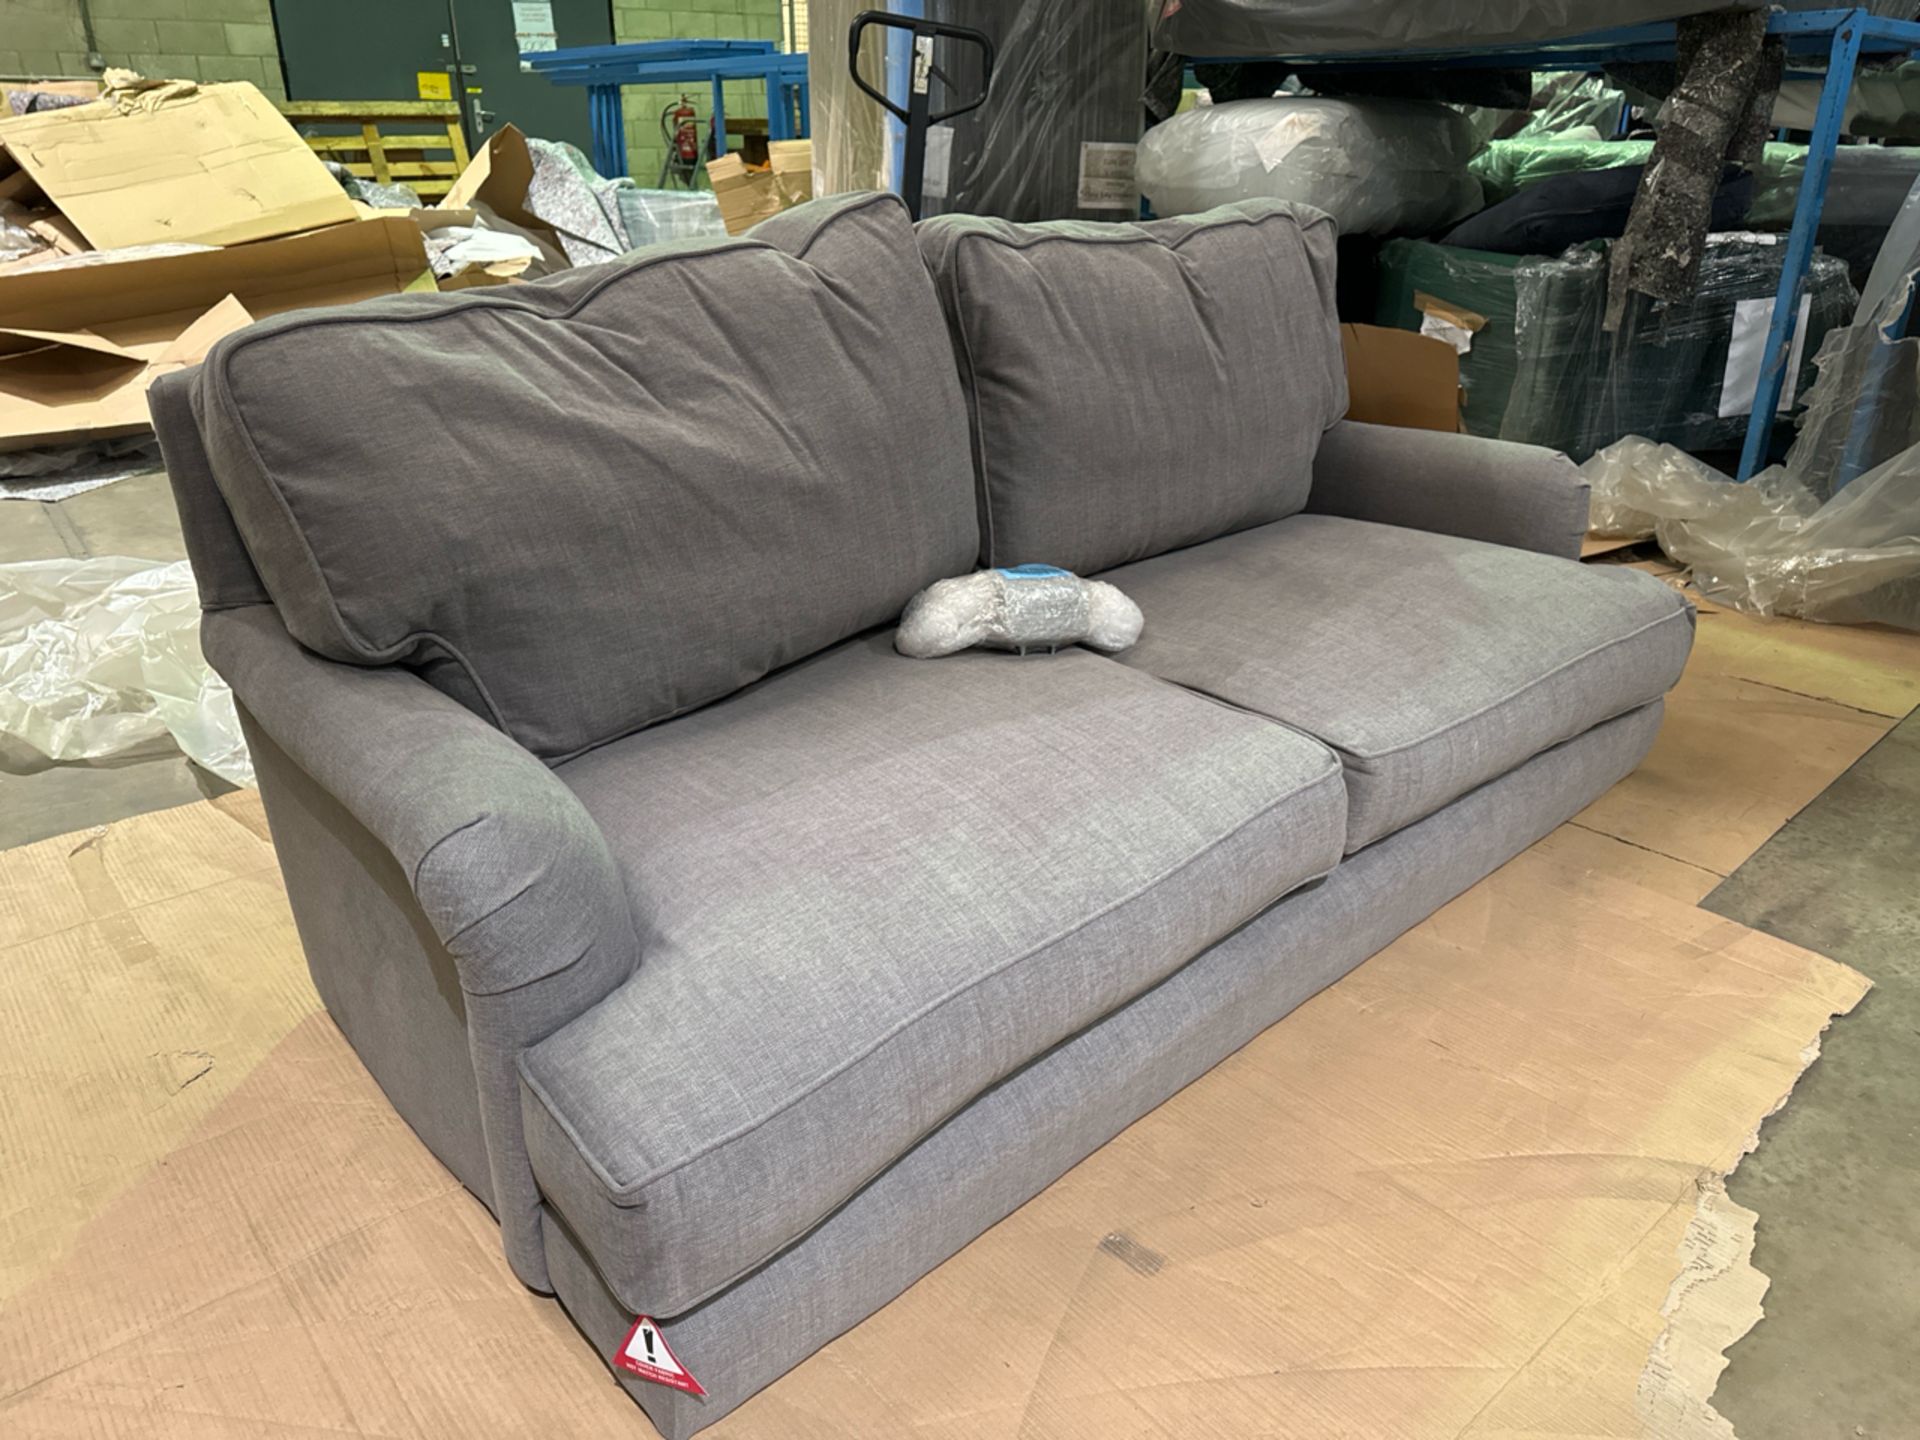 Bluebell 2.5 Seat Sofa In Plain COM RRP - £1980 - Image 2 of 5